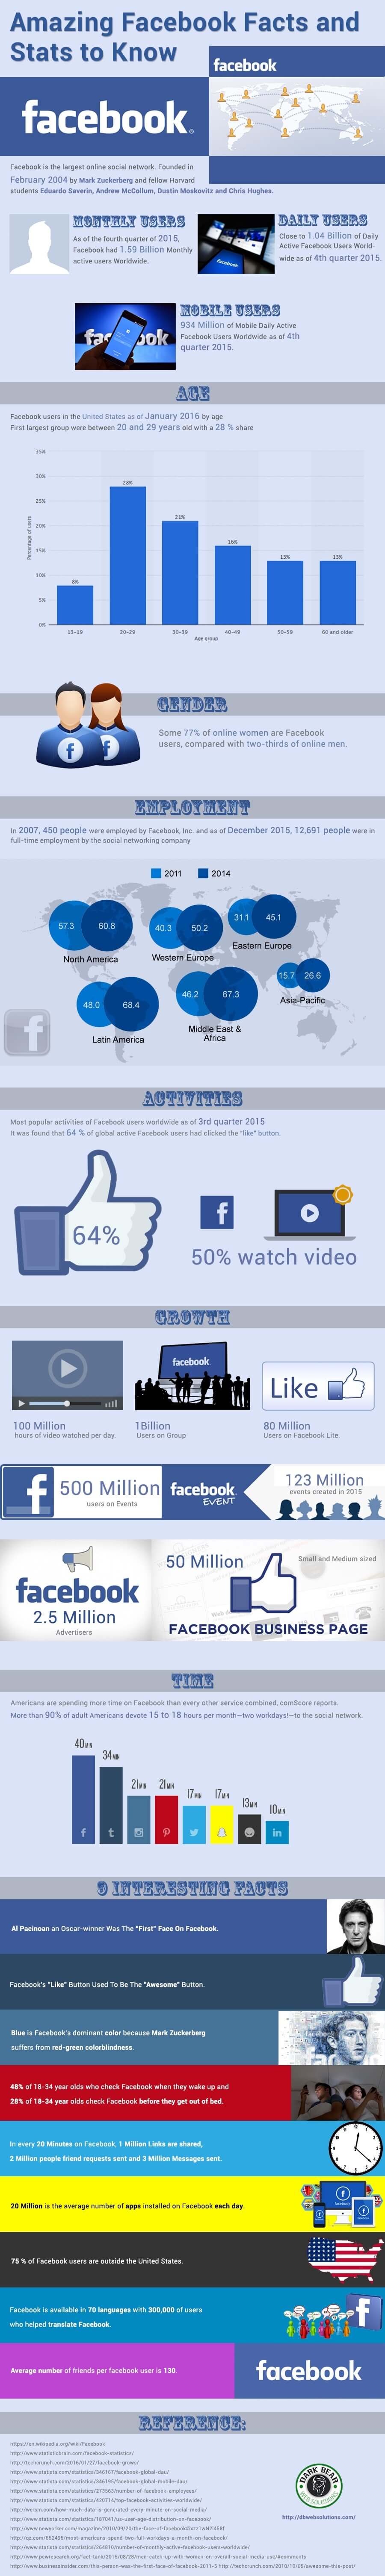 Amazing Facebook Facts and Stats to Know - An Infographic 070516